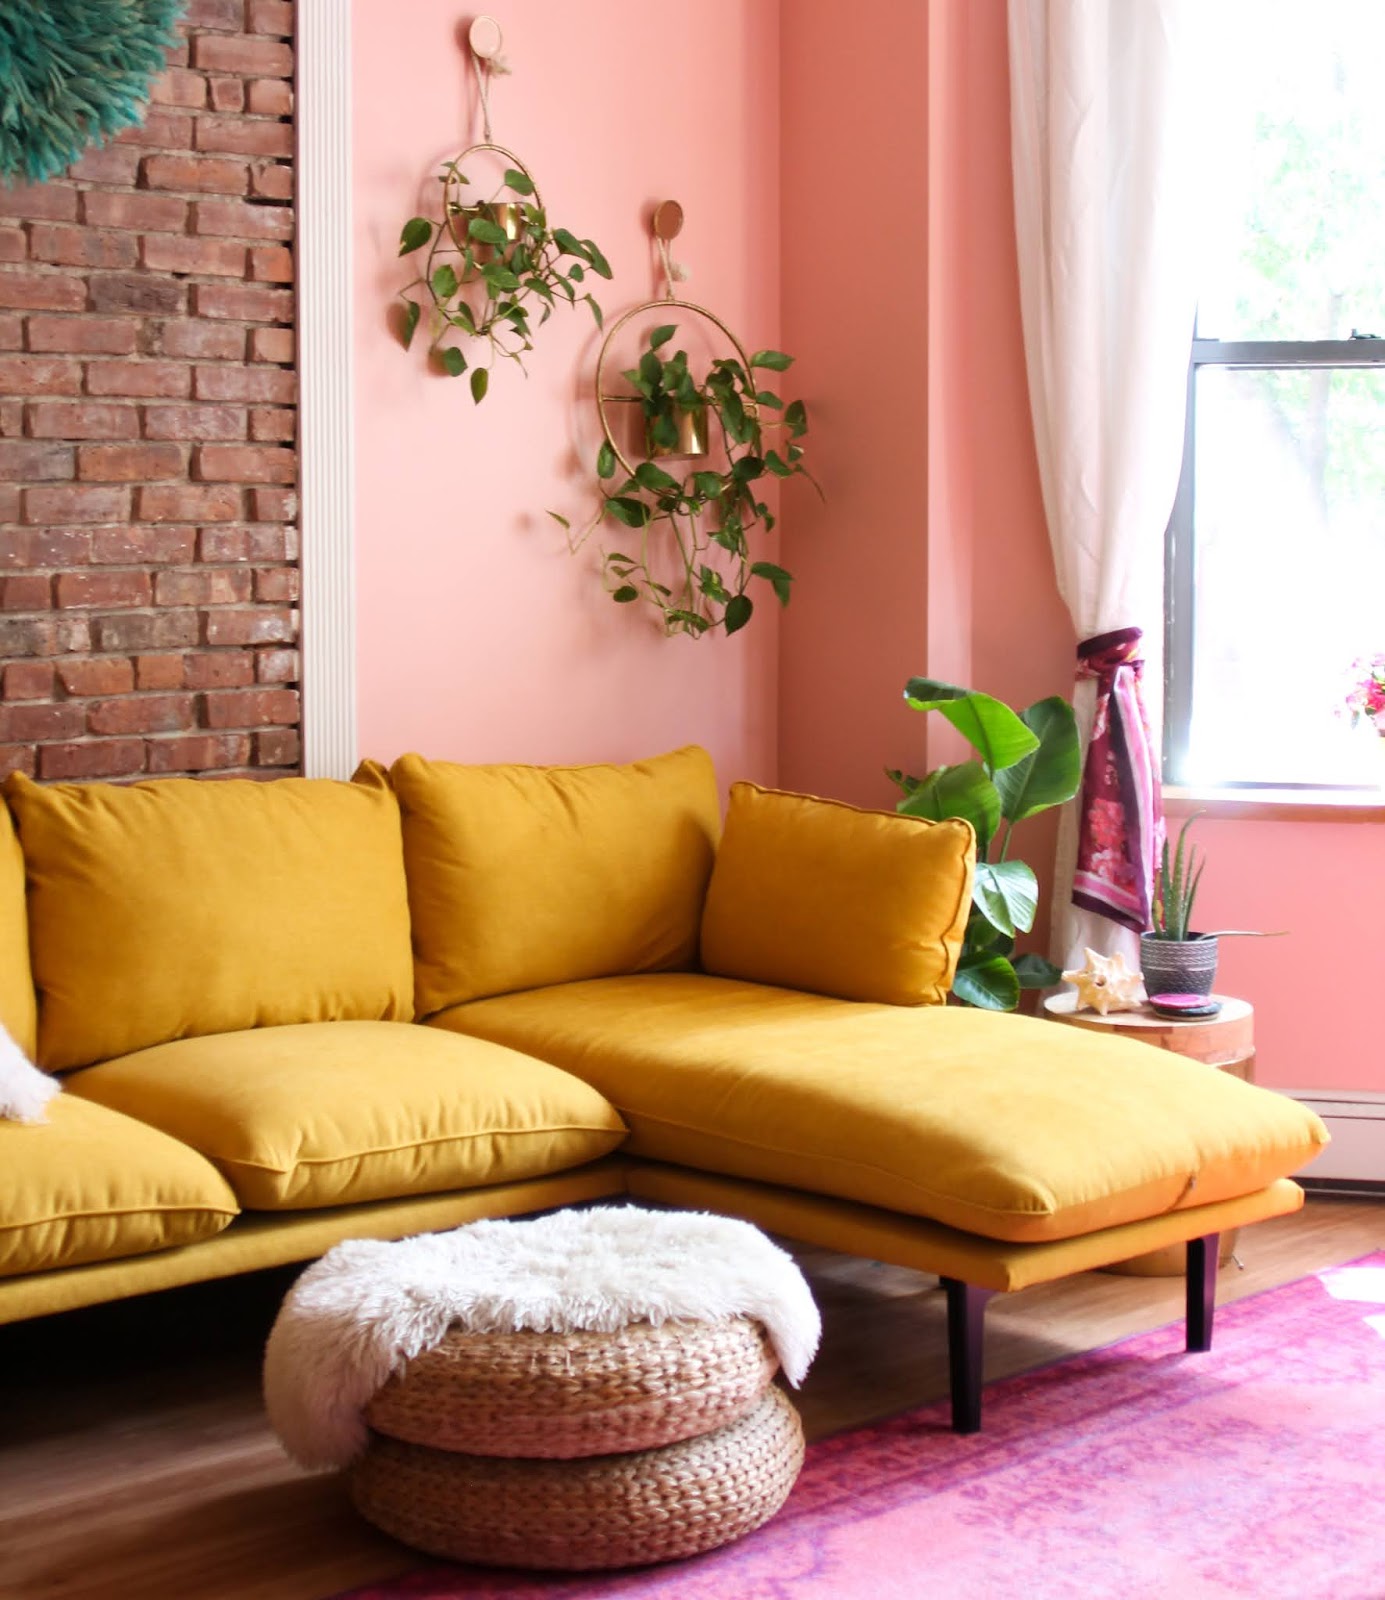 Ready To Go Bold In Your Living Room Heres The Bright Yellow Sofa Of Your Dreams TfDiaries By Megan Zietz